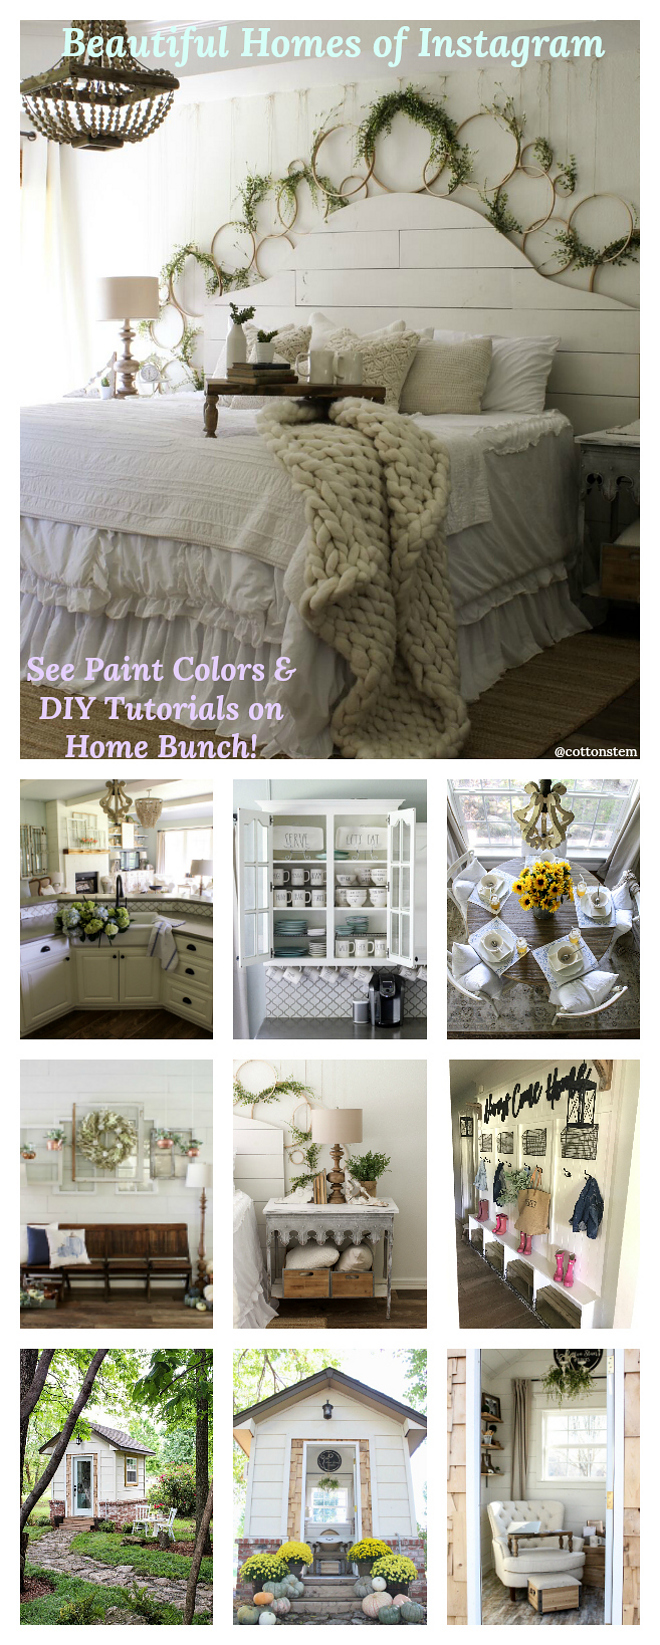 Beautiful Homes of Instagram. See paint colors and diy tutorials on Home Bunch